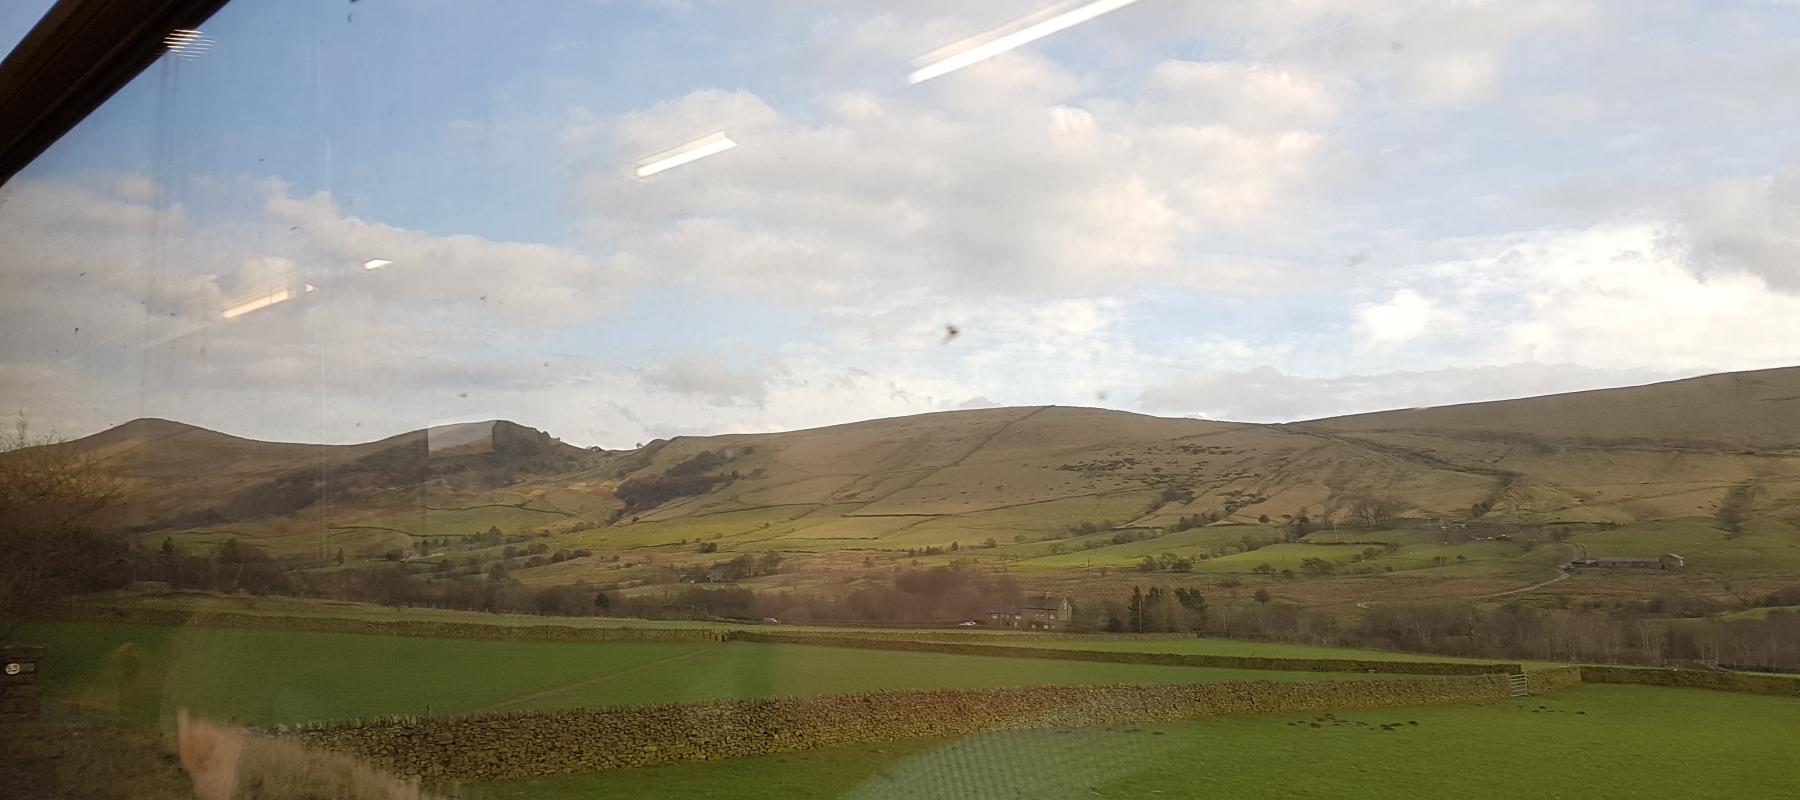 View from the train along the Buxton Line